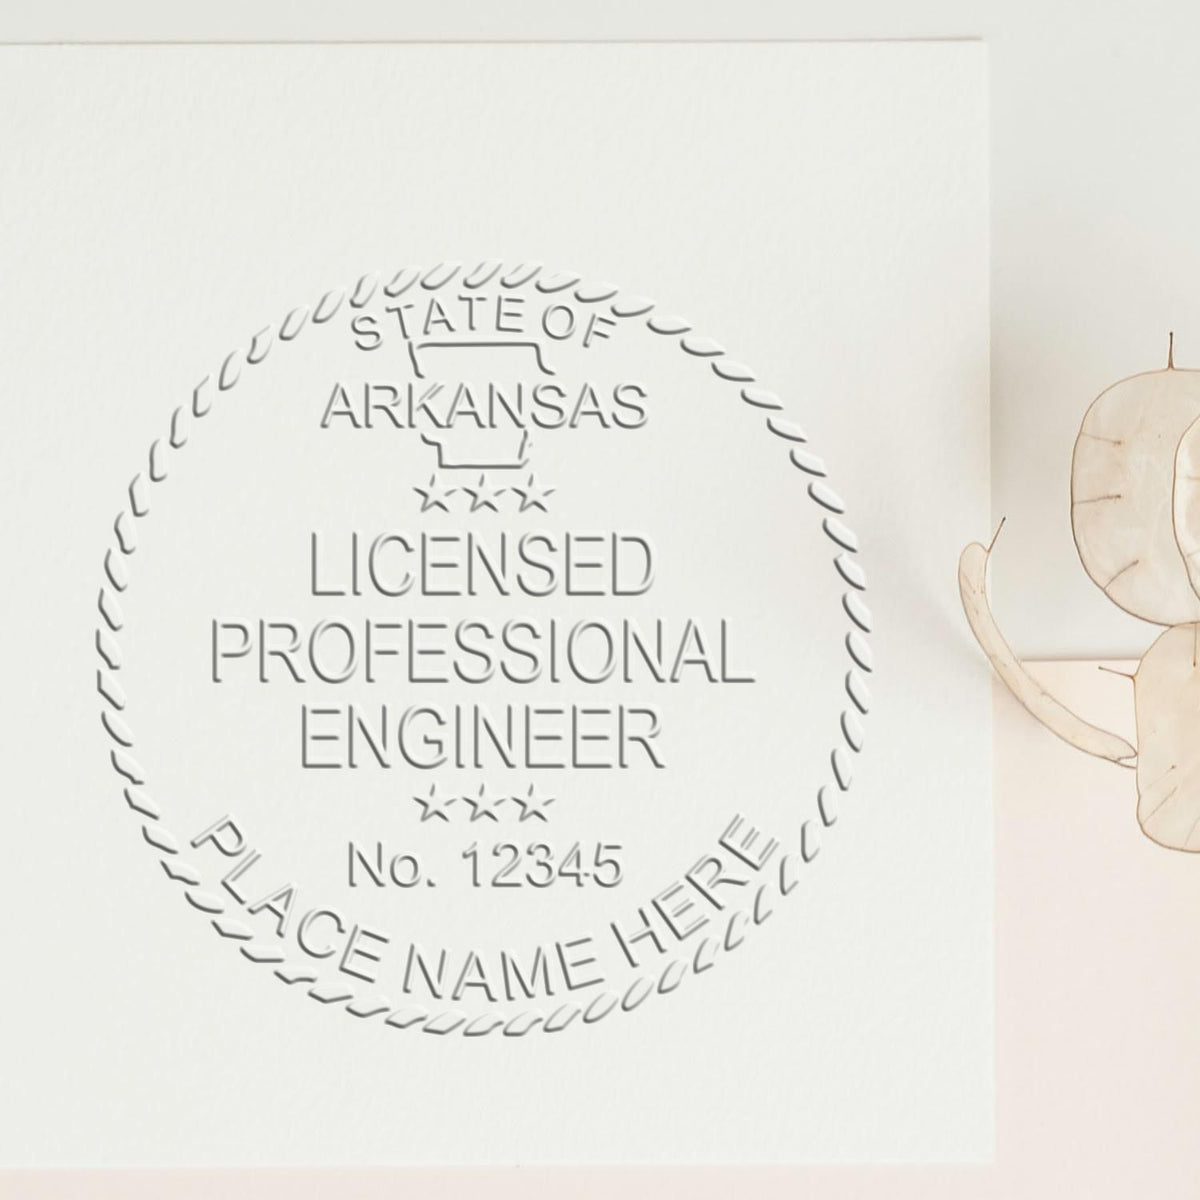 A stamped impression of the Soft Arkansas Professional Engineer Seal in this stylish lifestyle photo, setting the tone for a unique and personalized product.